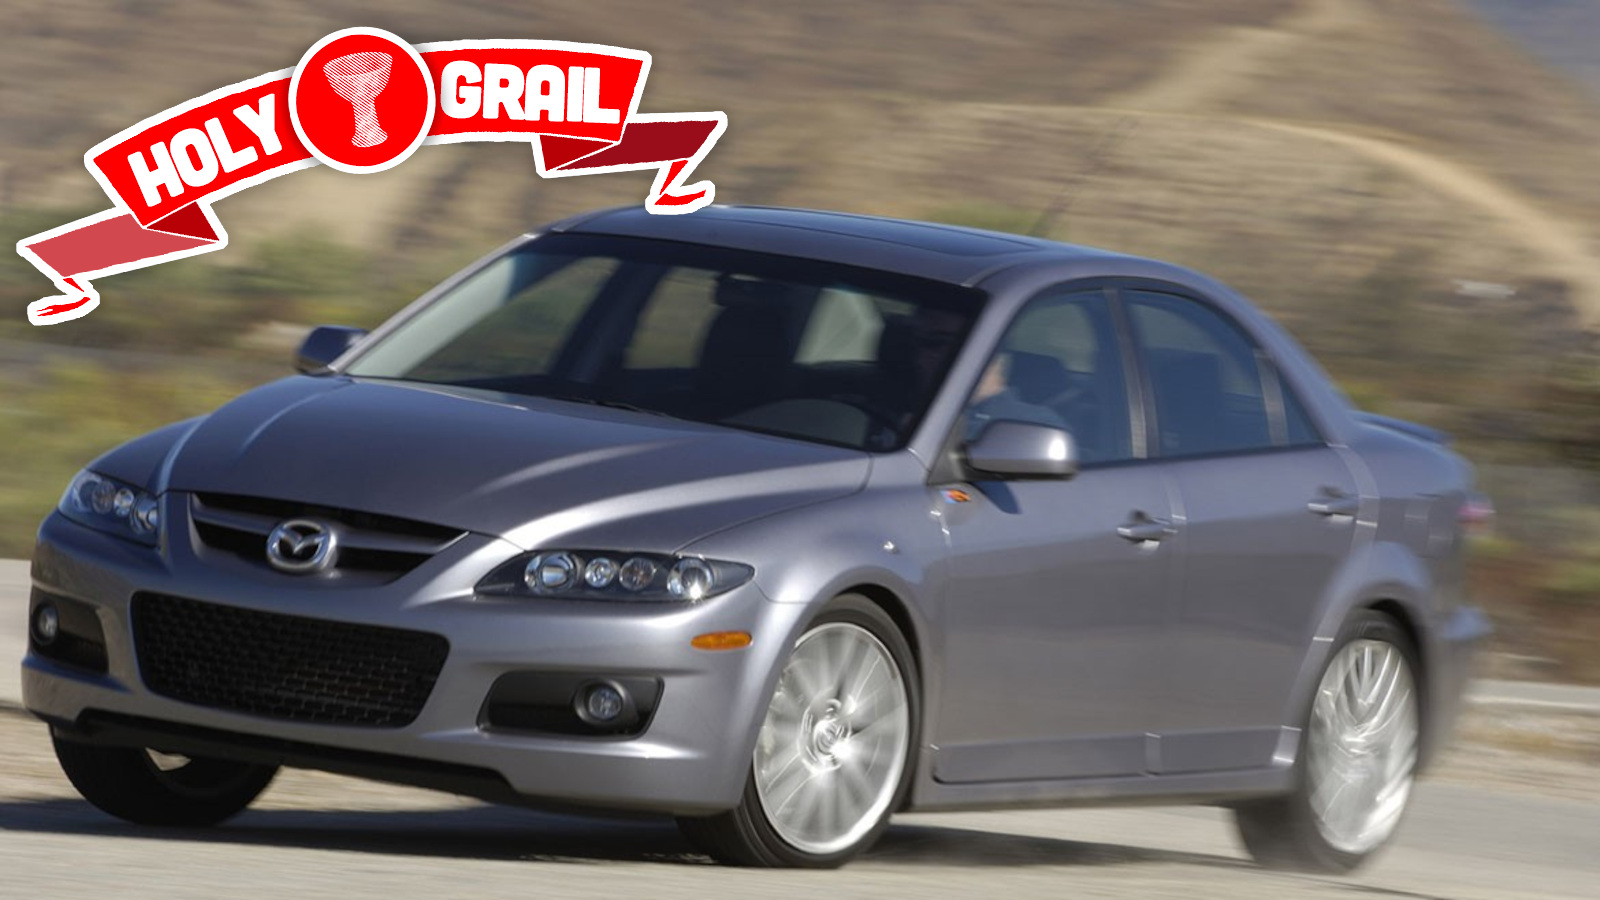 For Just Two Years You Could Buy A Practical Mazda Sedan That Hit 60 MPH In  Under 6 Seconds: Holy Grails - The Autopian